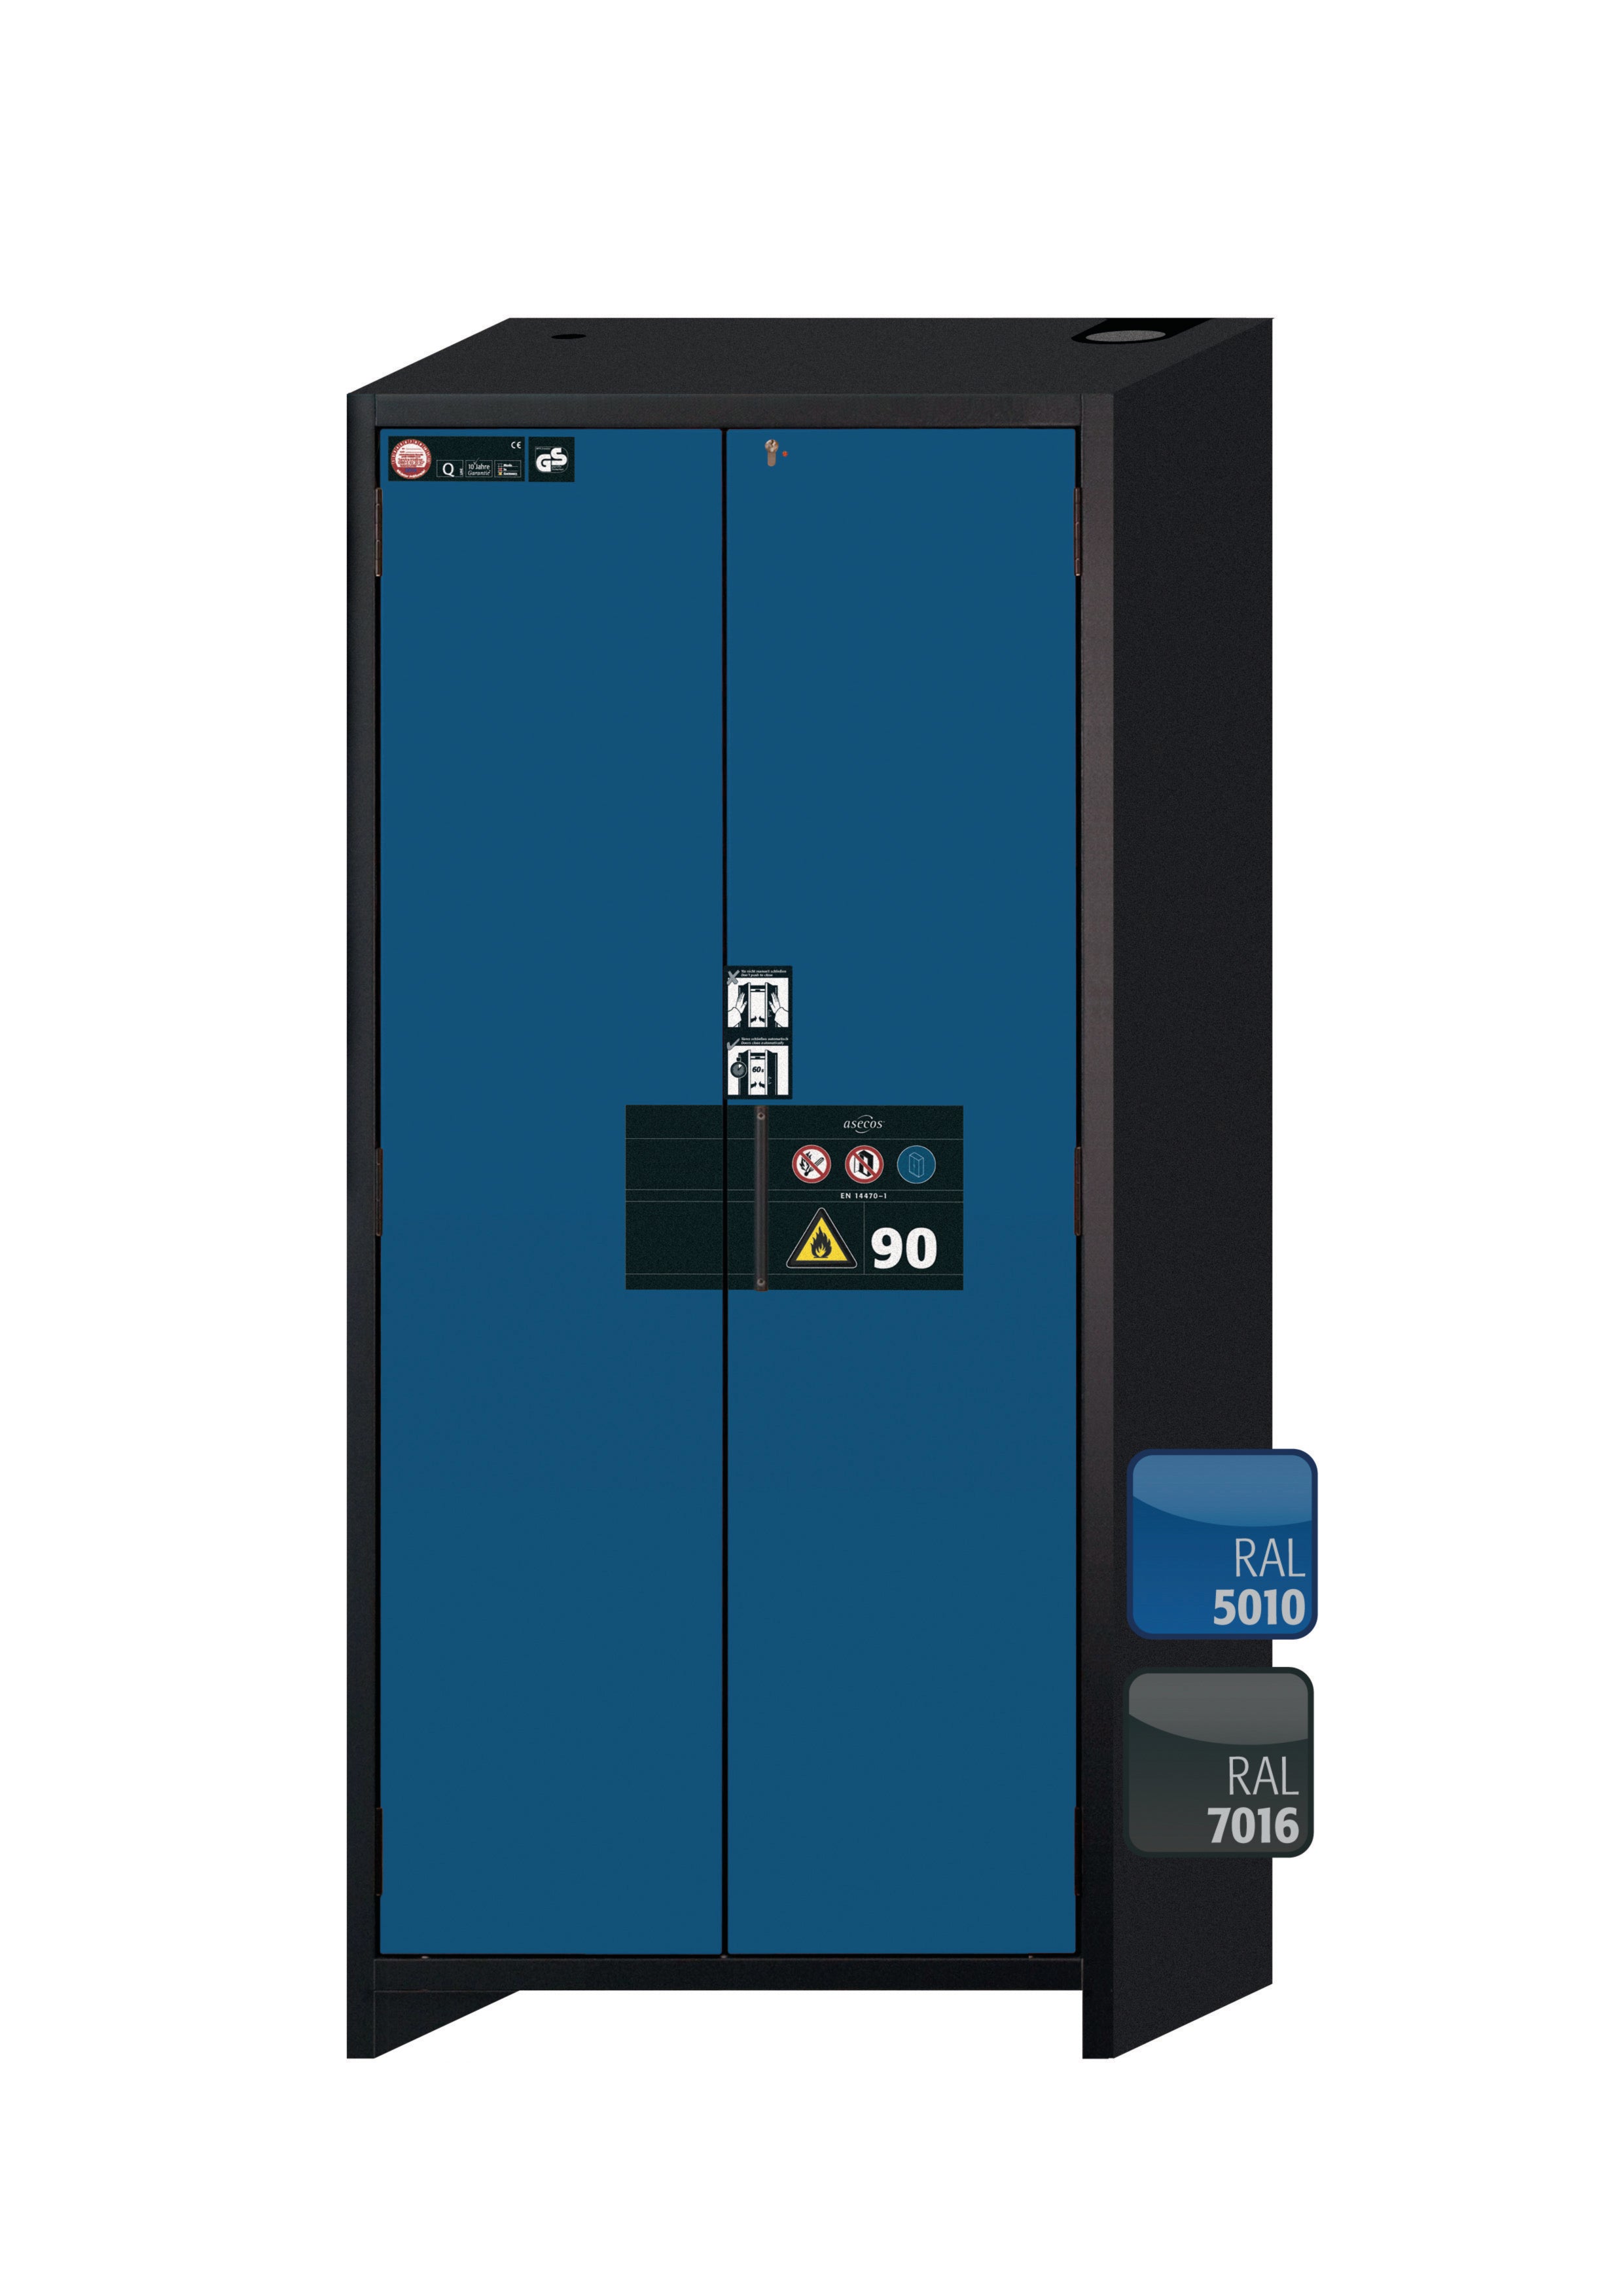 Type 90 safety storage cabinet Q-PEGASUS-90 model Q90.195.090.WDAC in gentian blue RAL 5010 with 6x drawer (standard) (stainless steel 1.4301),